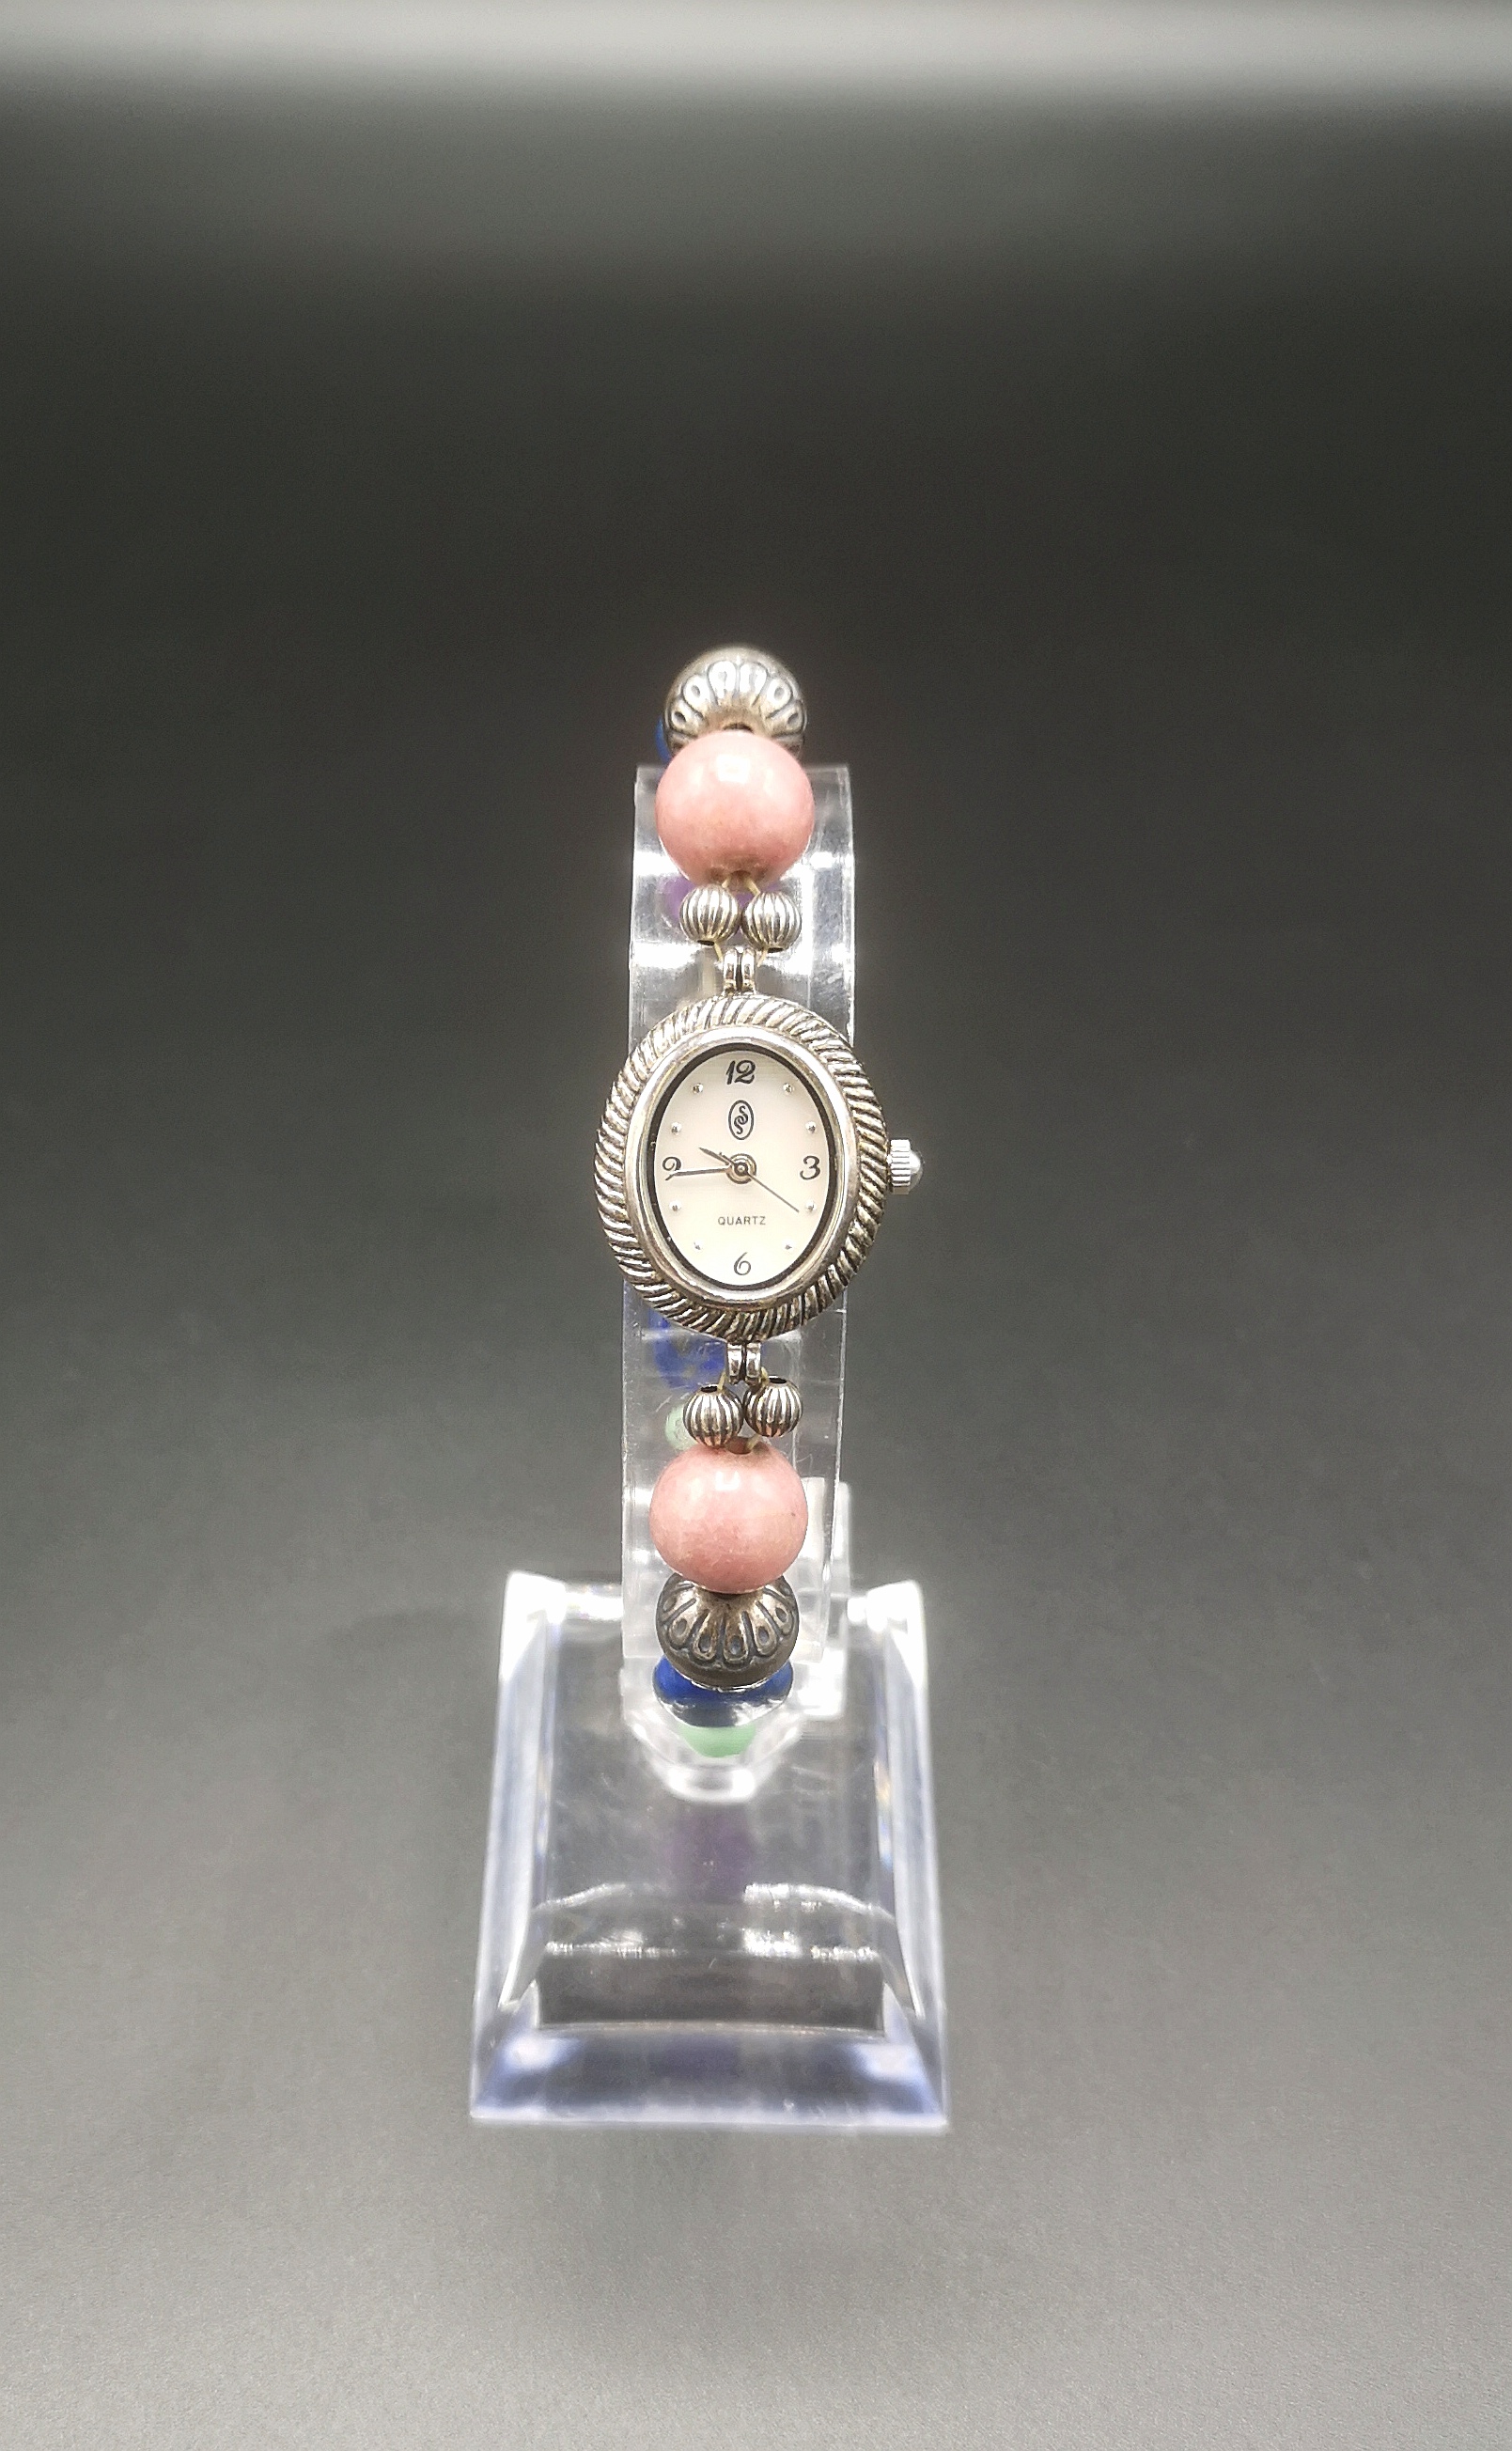 Watch bracelet set with silver and semi precious stone beads - Image 2 of 6